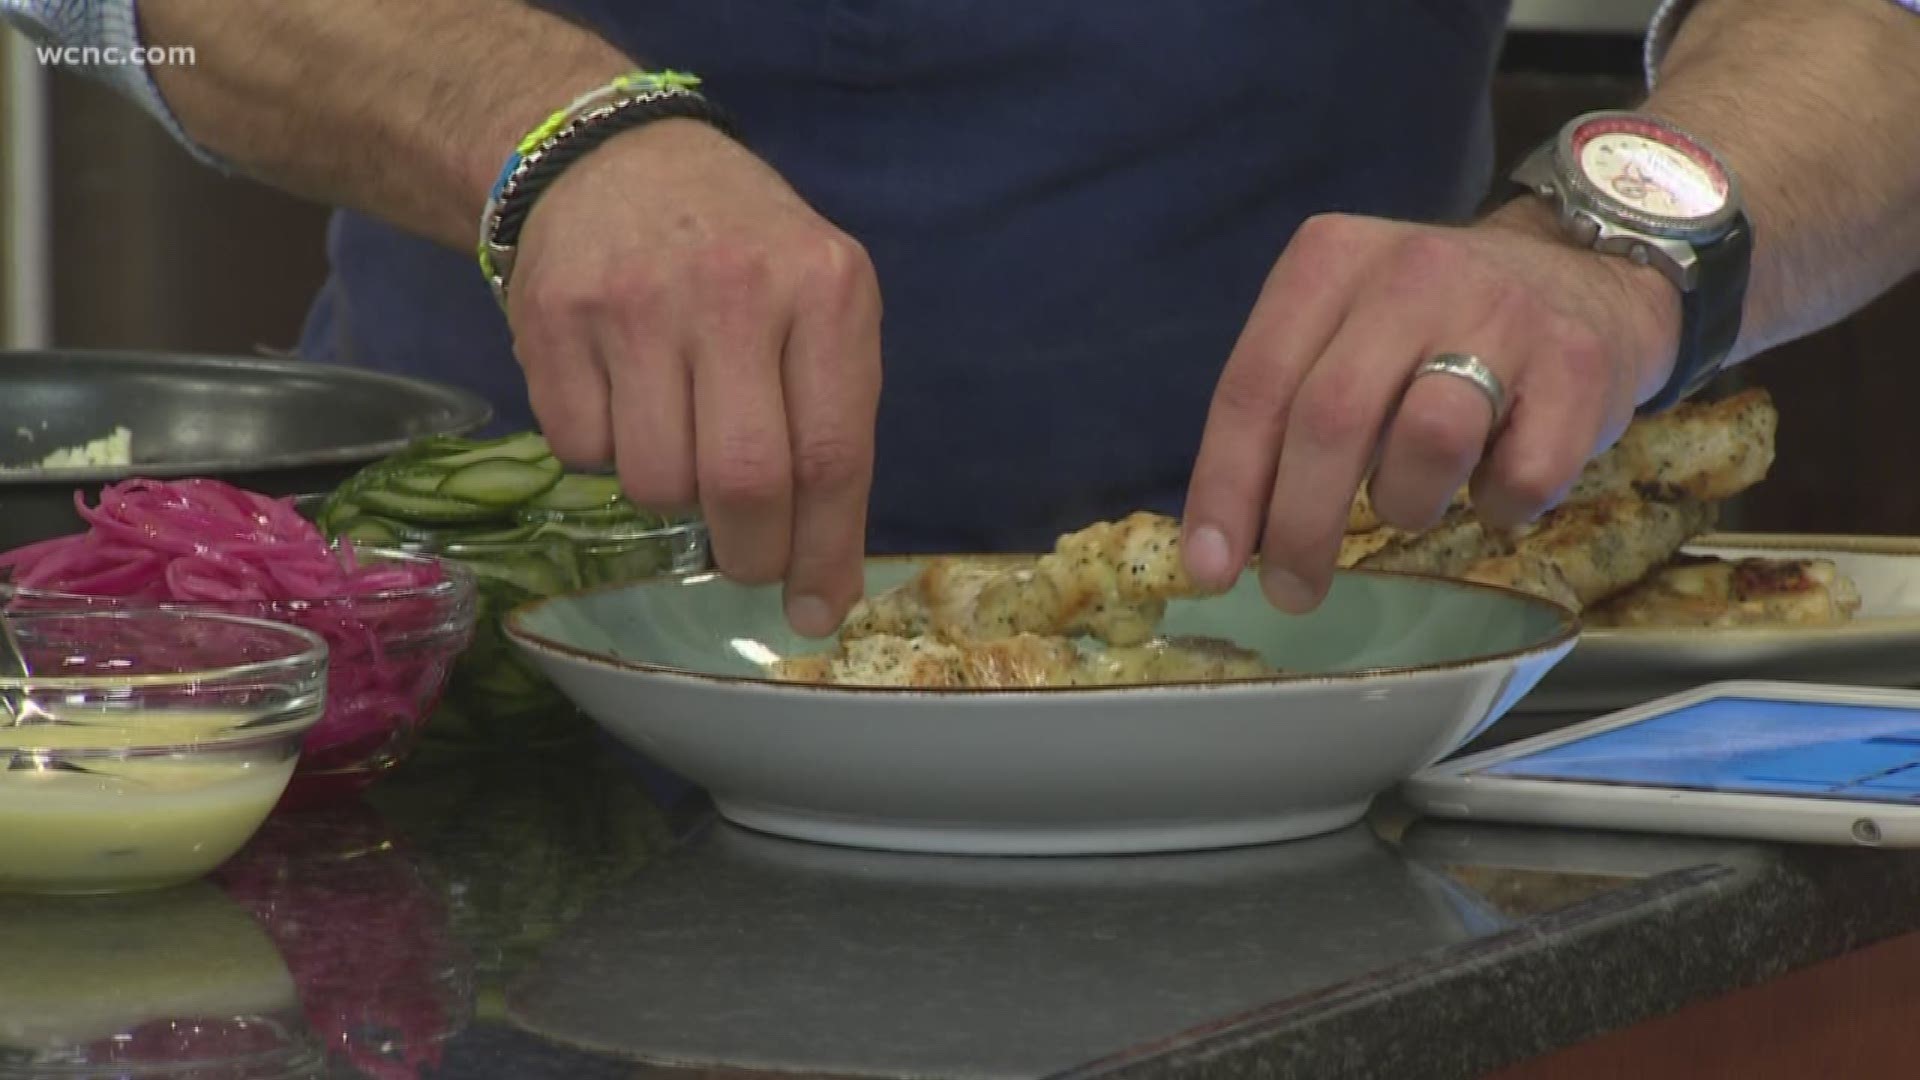 Stratos Lambos from Ilios Noche shows us how to prepare one of their popular menu items – the Ilios Bowl.